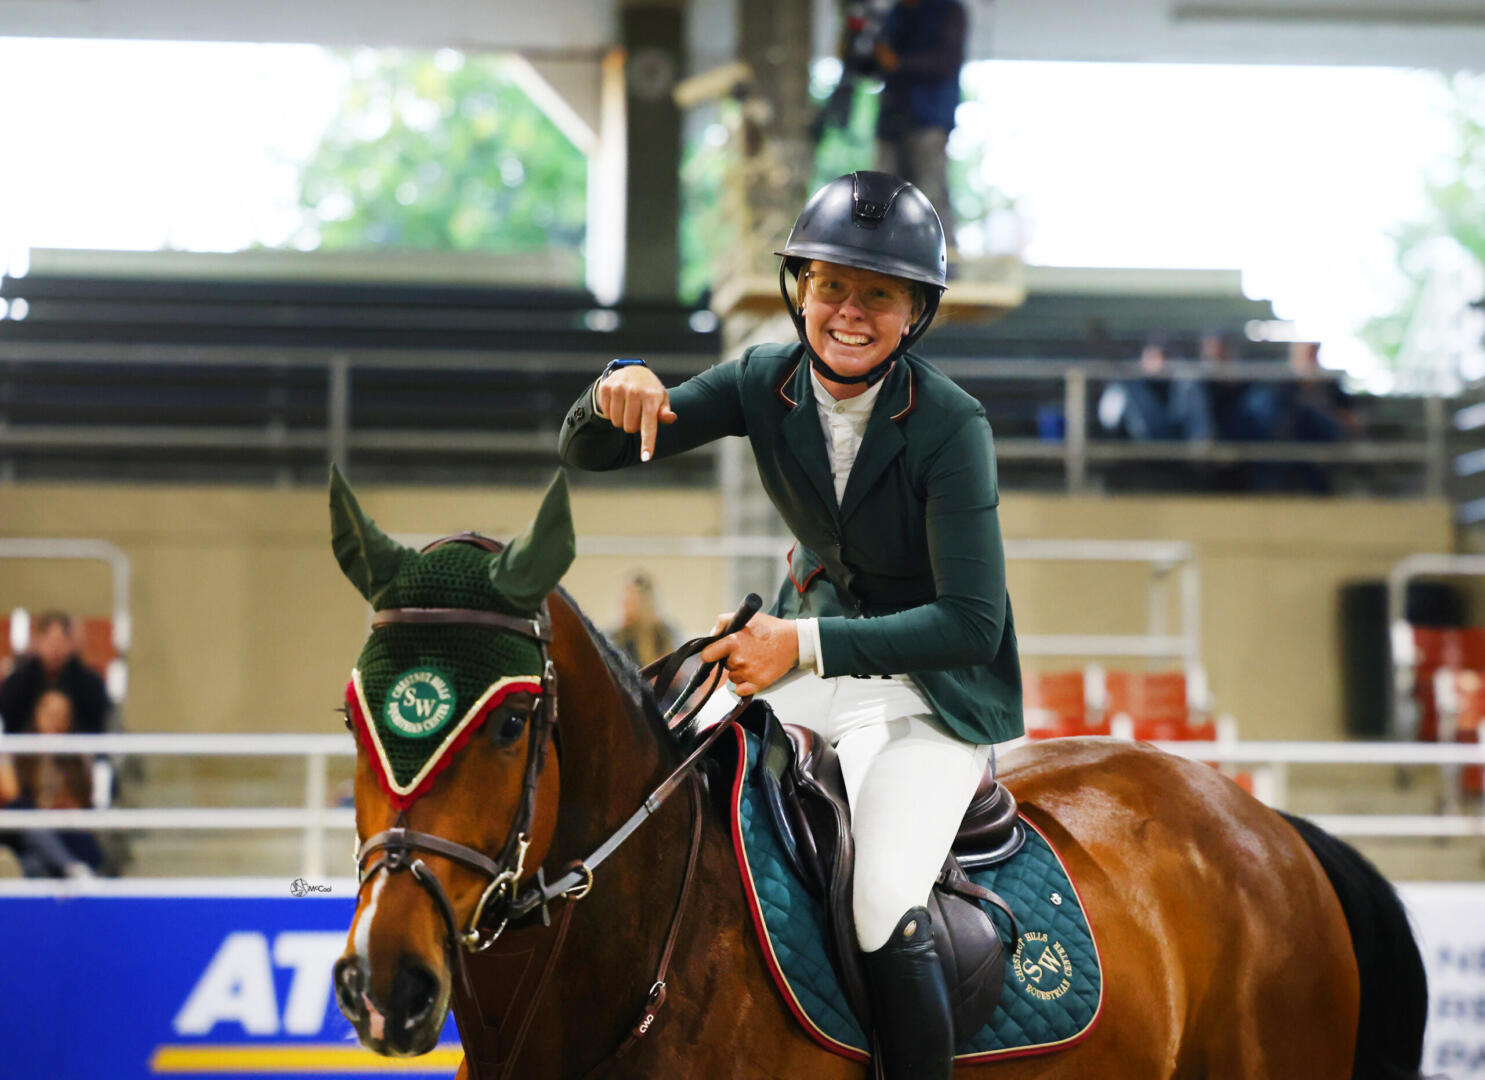 Shelby Drazan on her horses in 2014